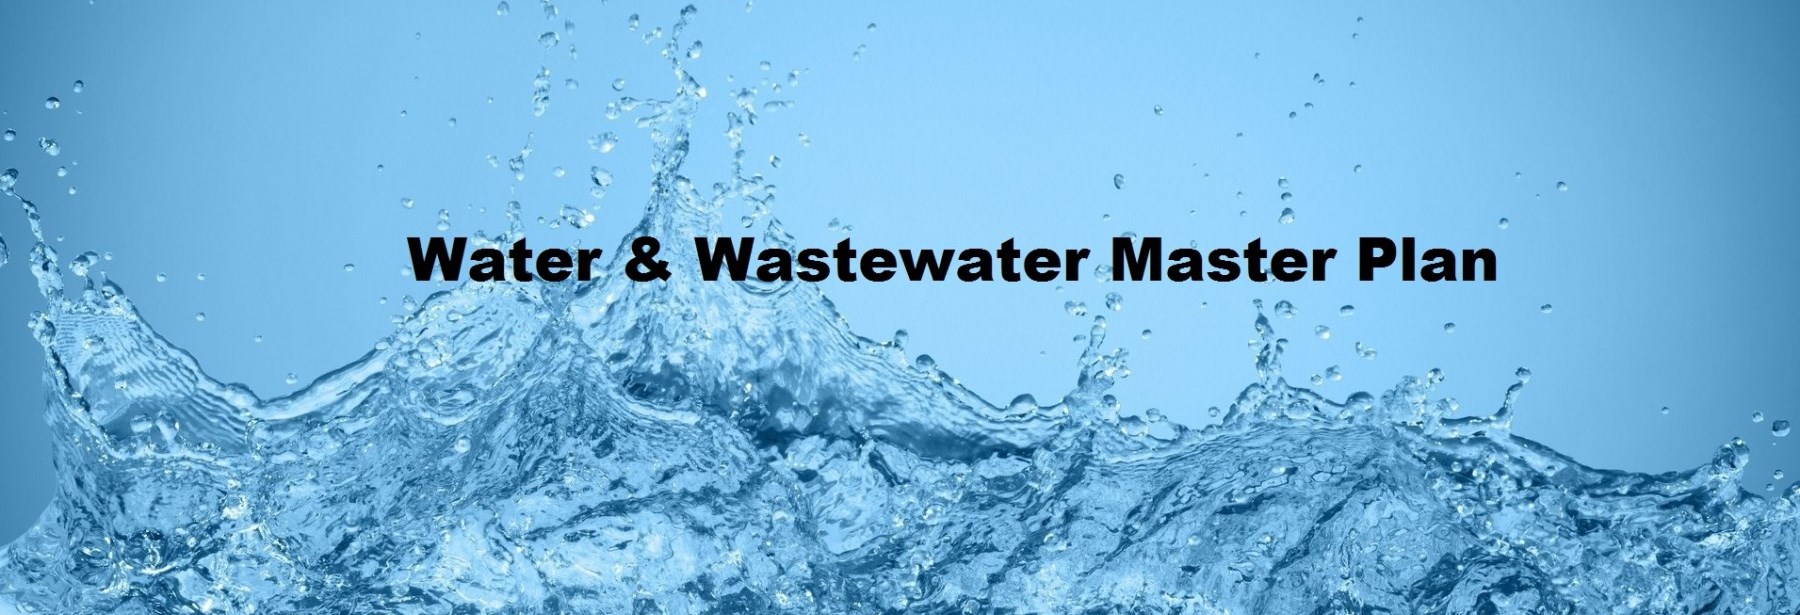 Water and Wastewater Master Plan banner